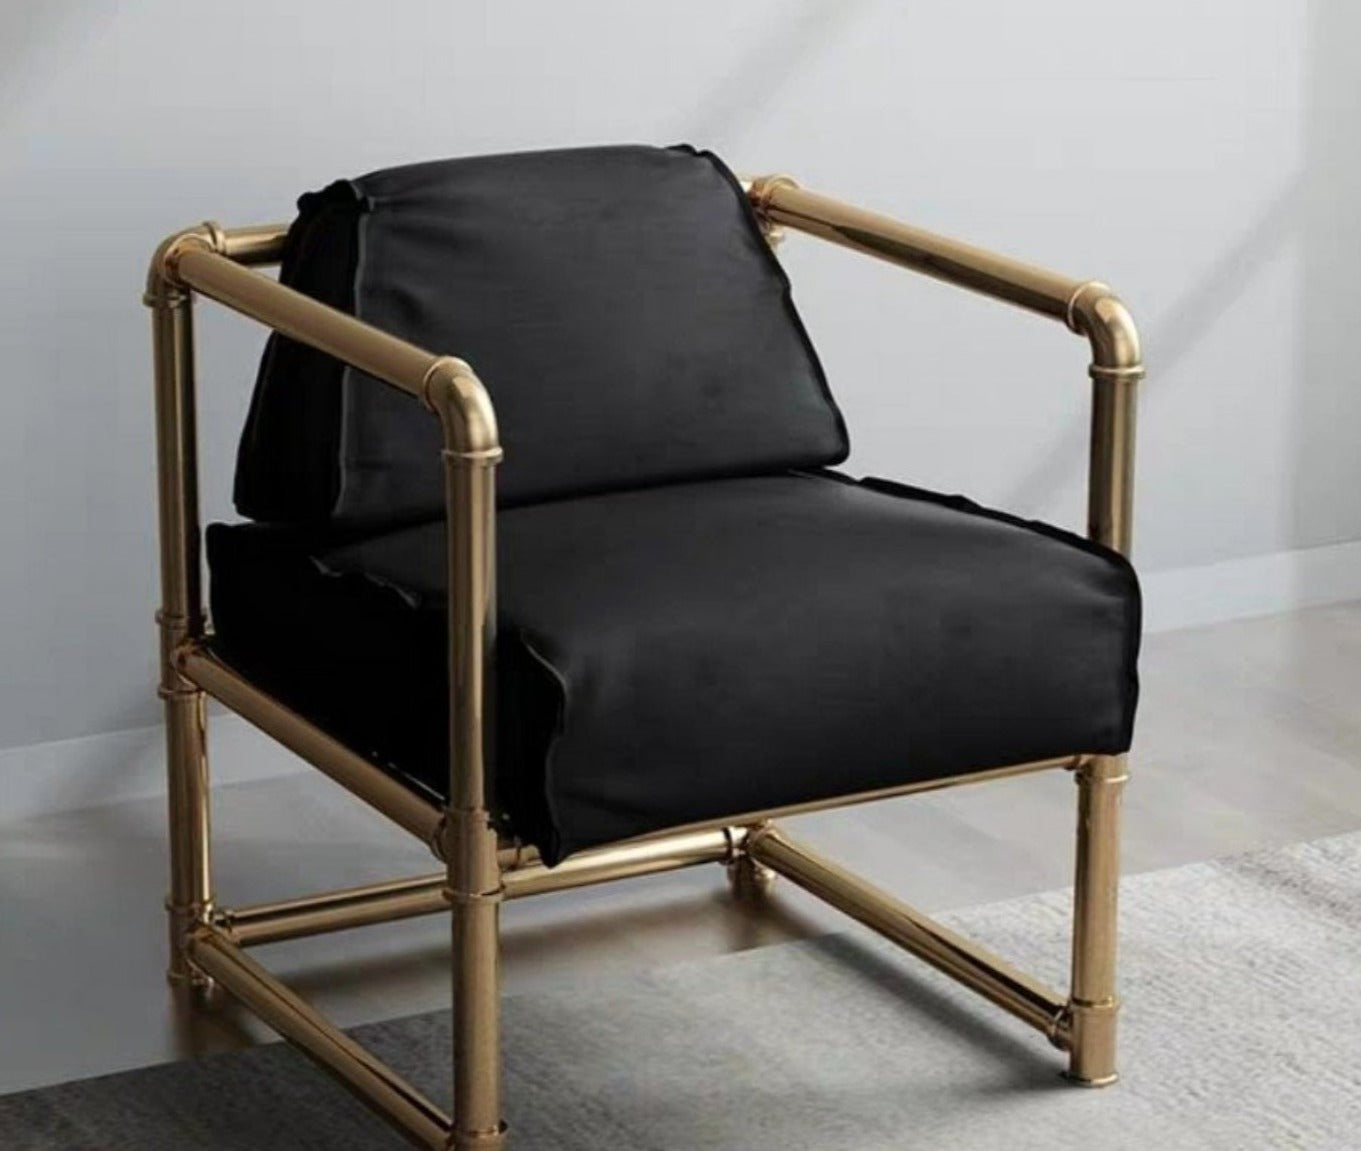 EMBER Industrial Piping Sofa / Armchair